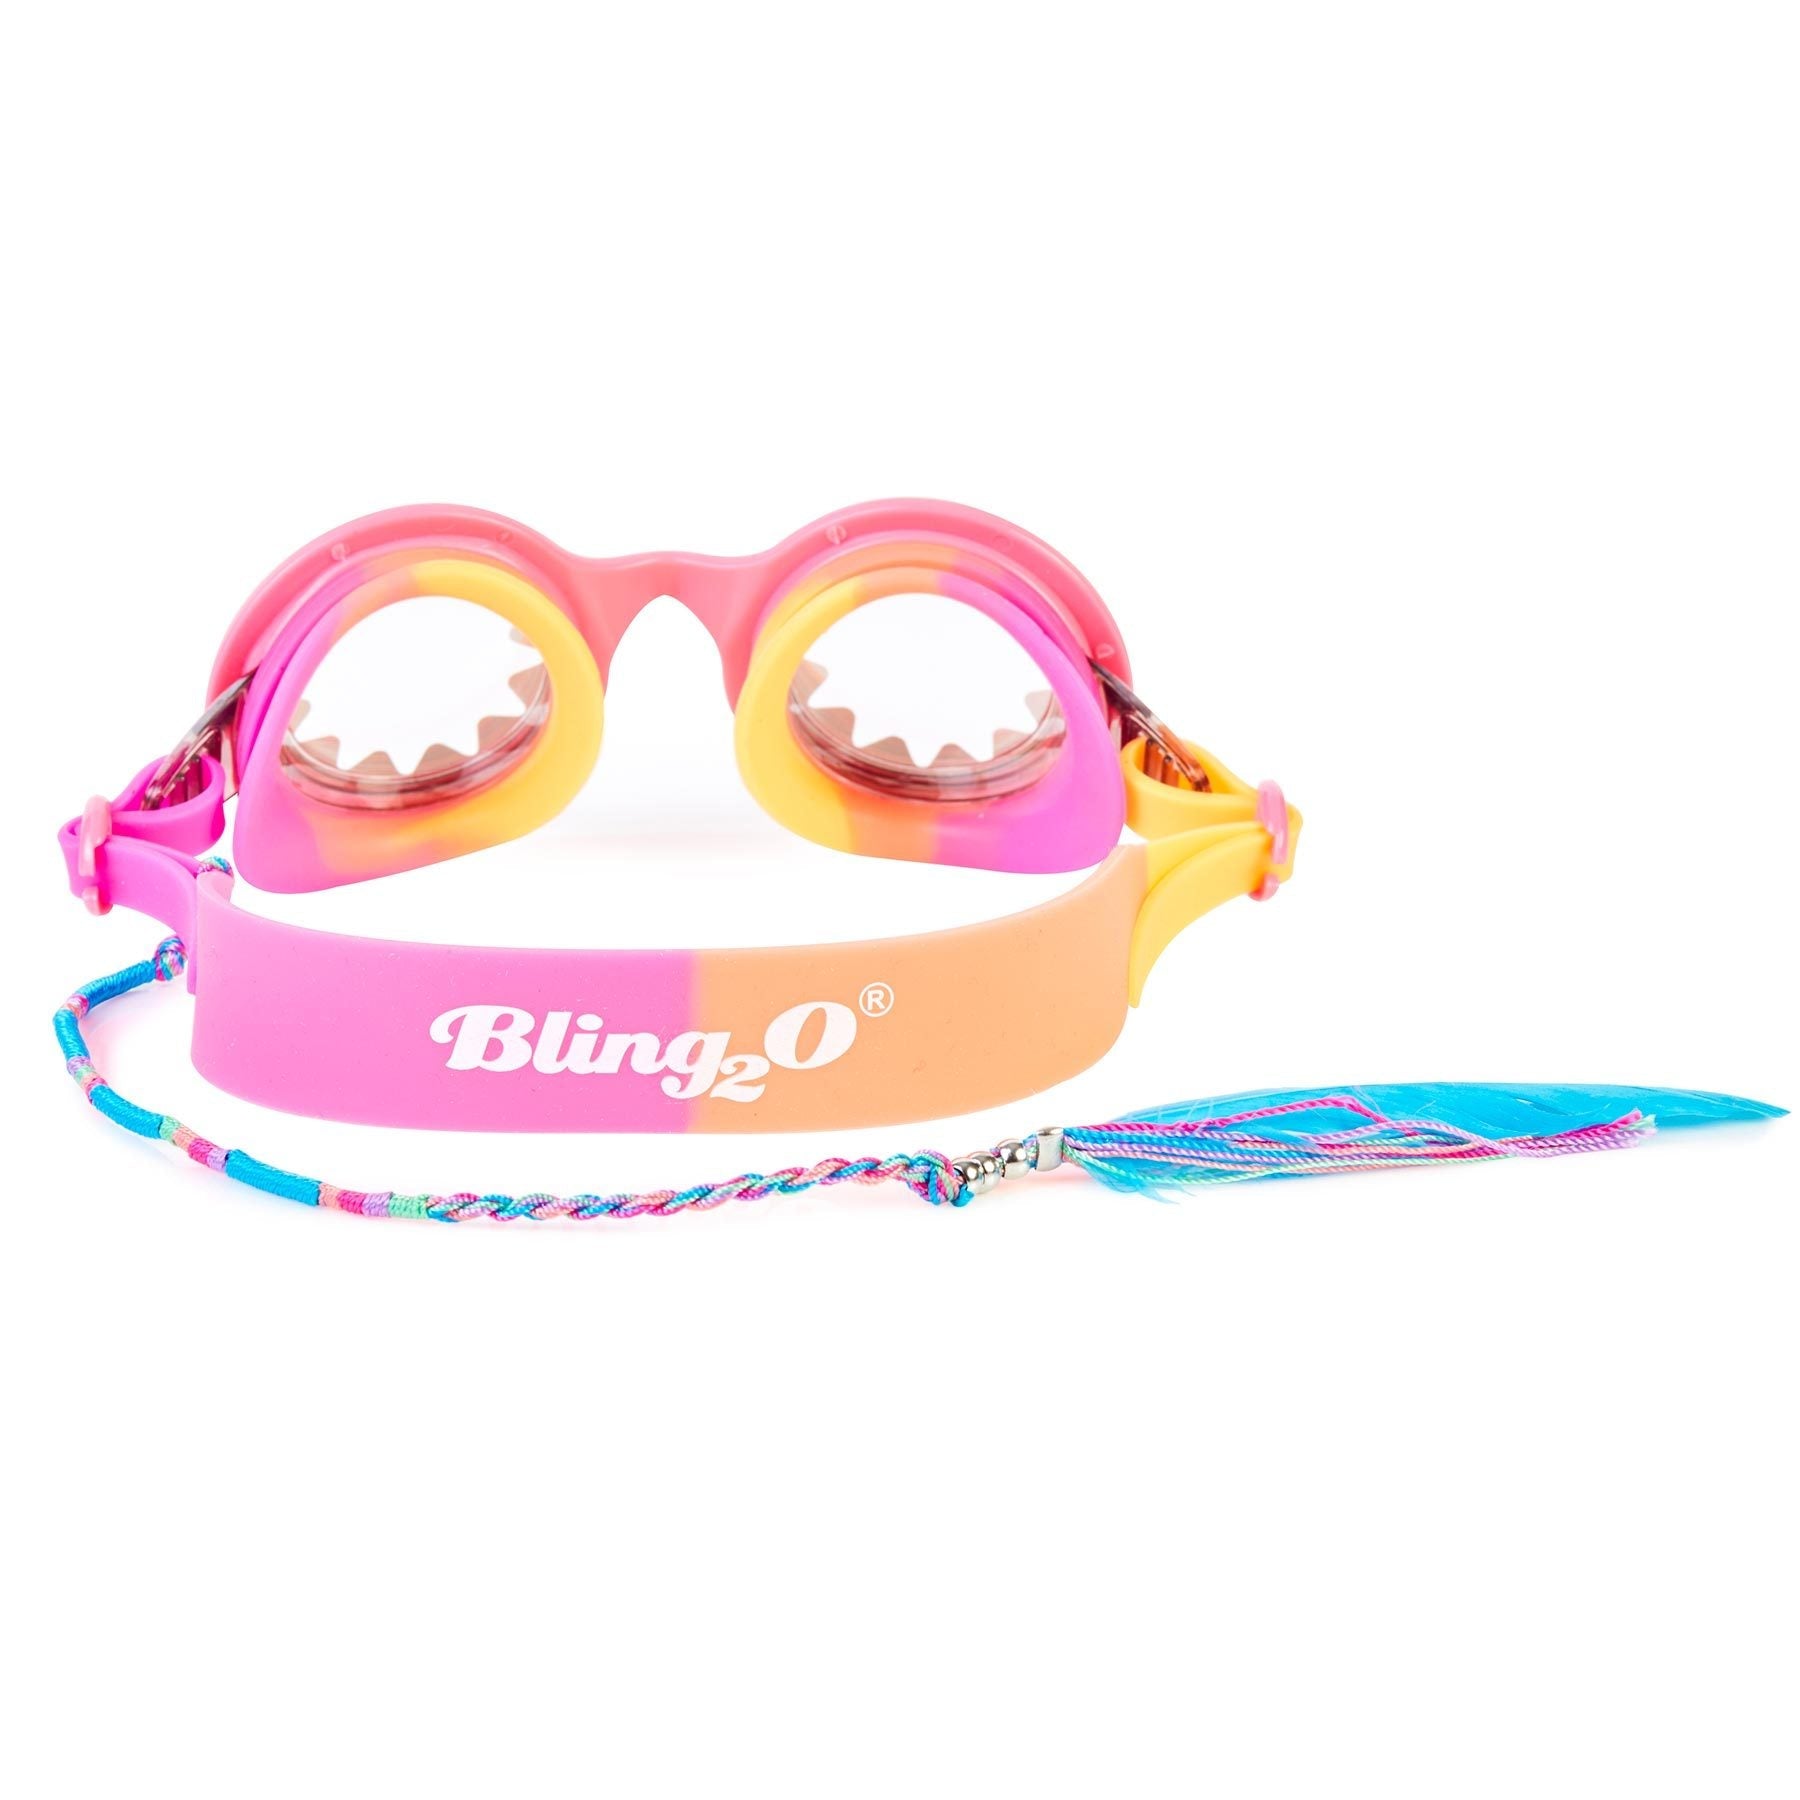 Bling2o Follow Your Dreams Swim Goggles Peaceful Pink Strap